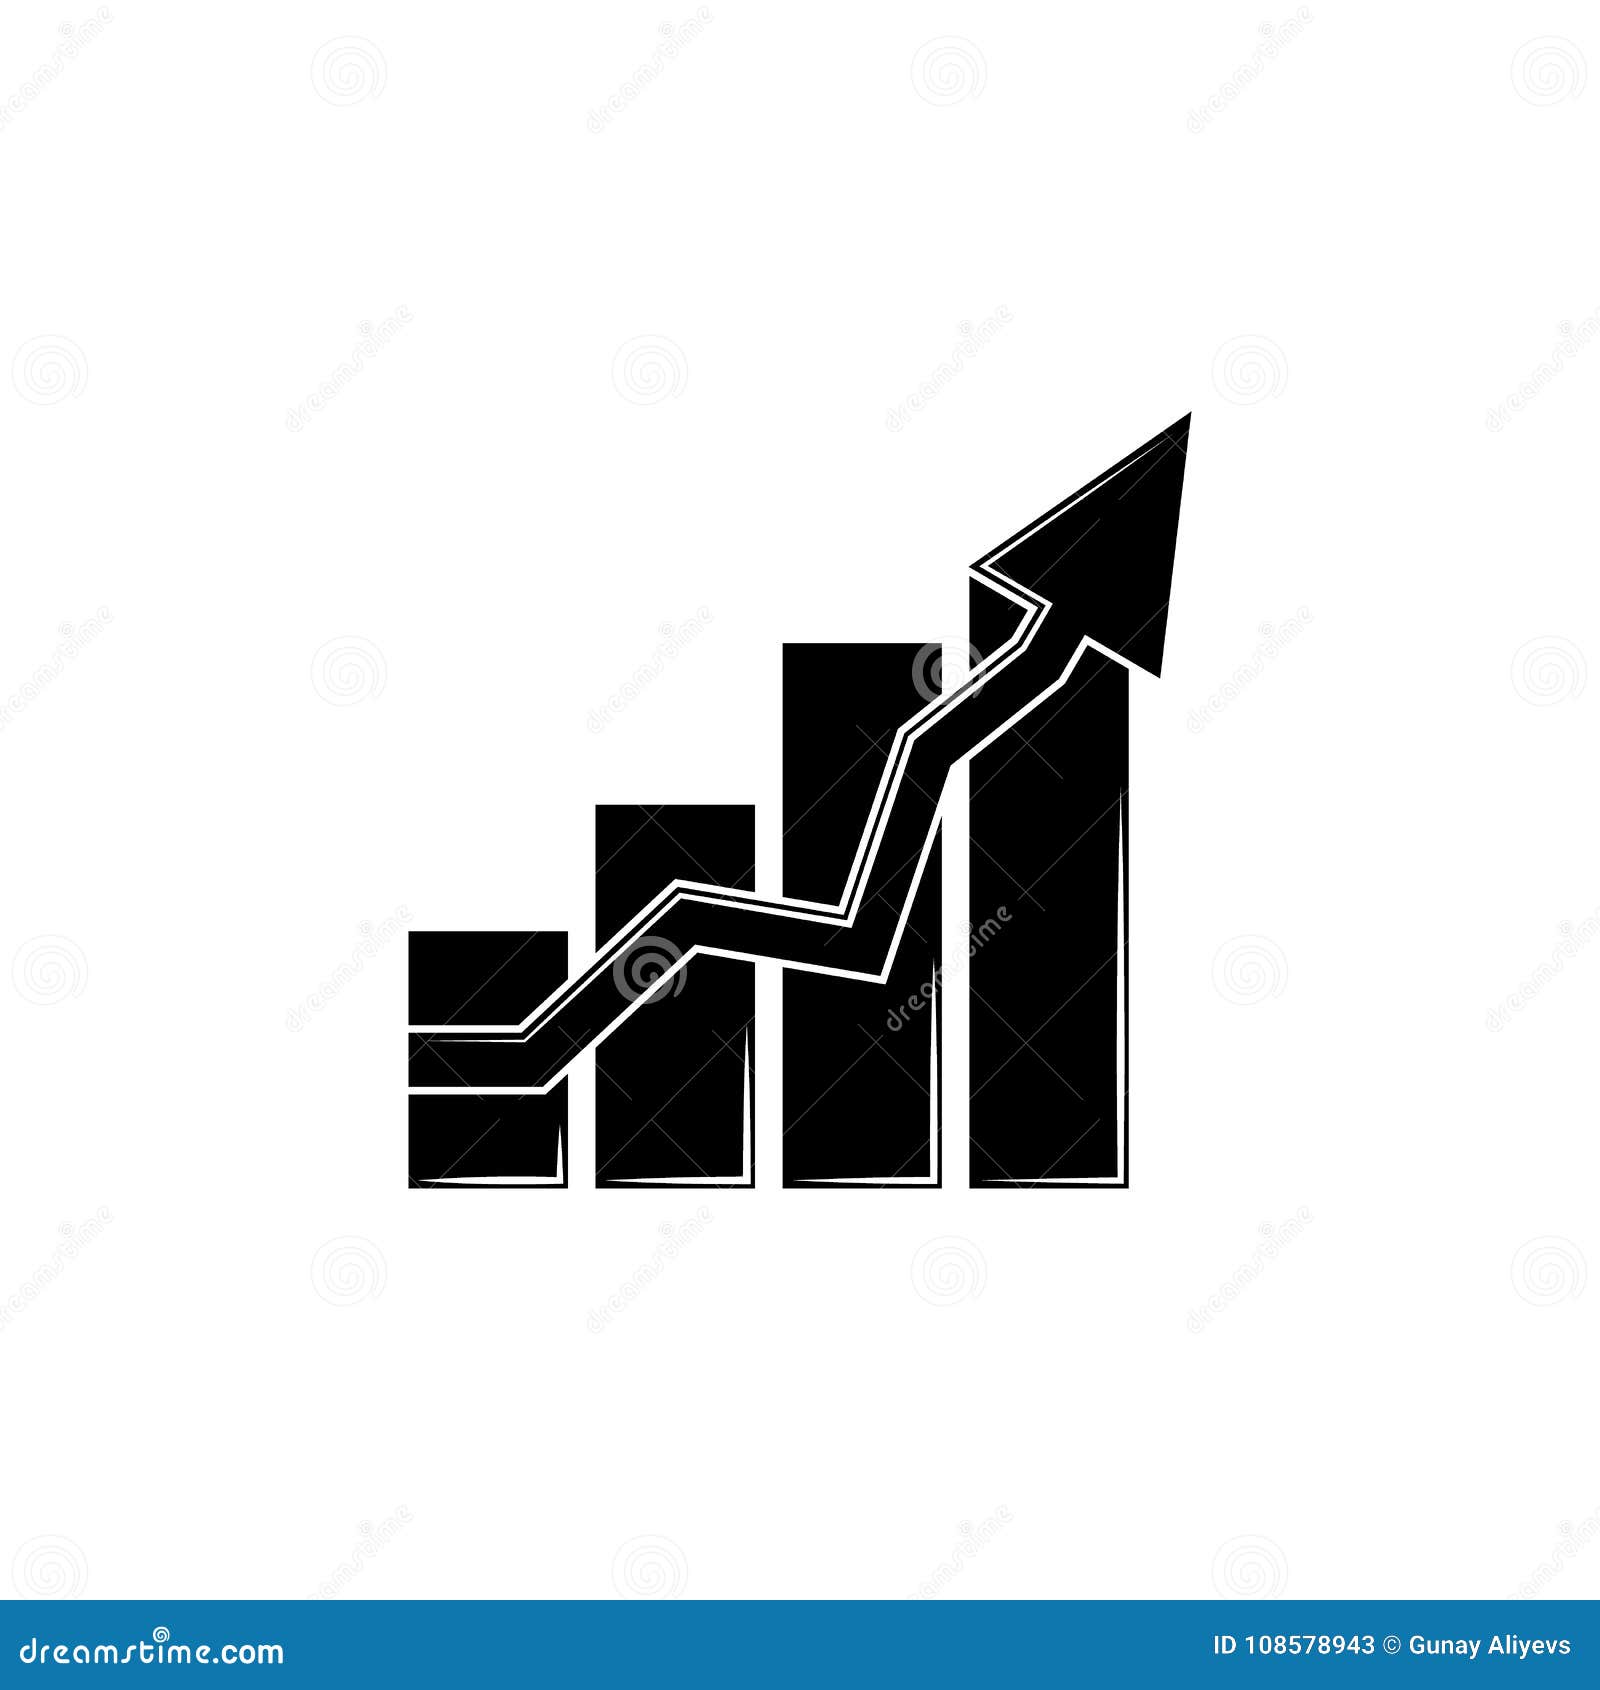 colomn graph with up diagramma icon. trend diagram  icon. business analytics concept  icon. signs and s icon fo